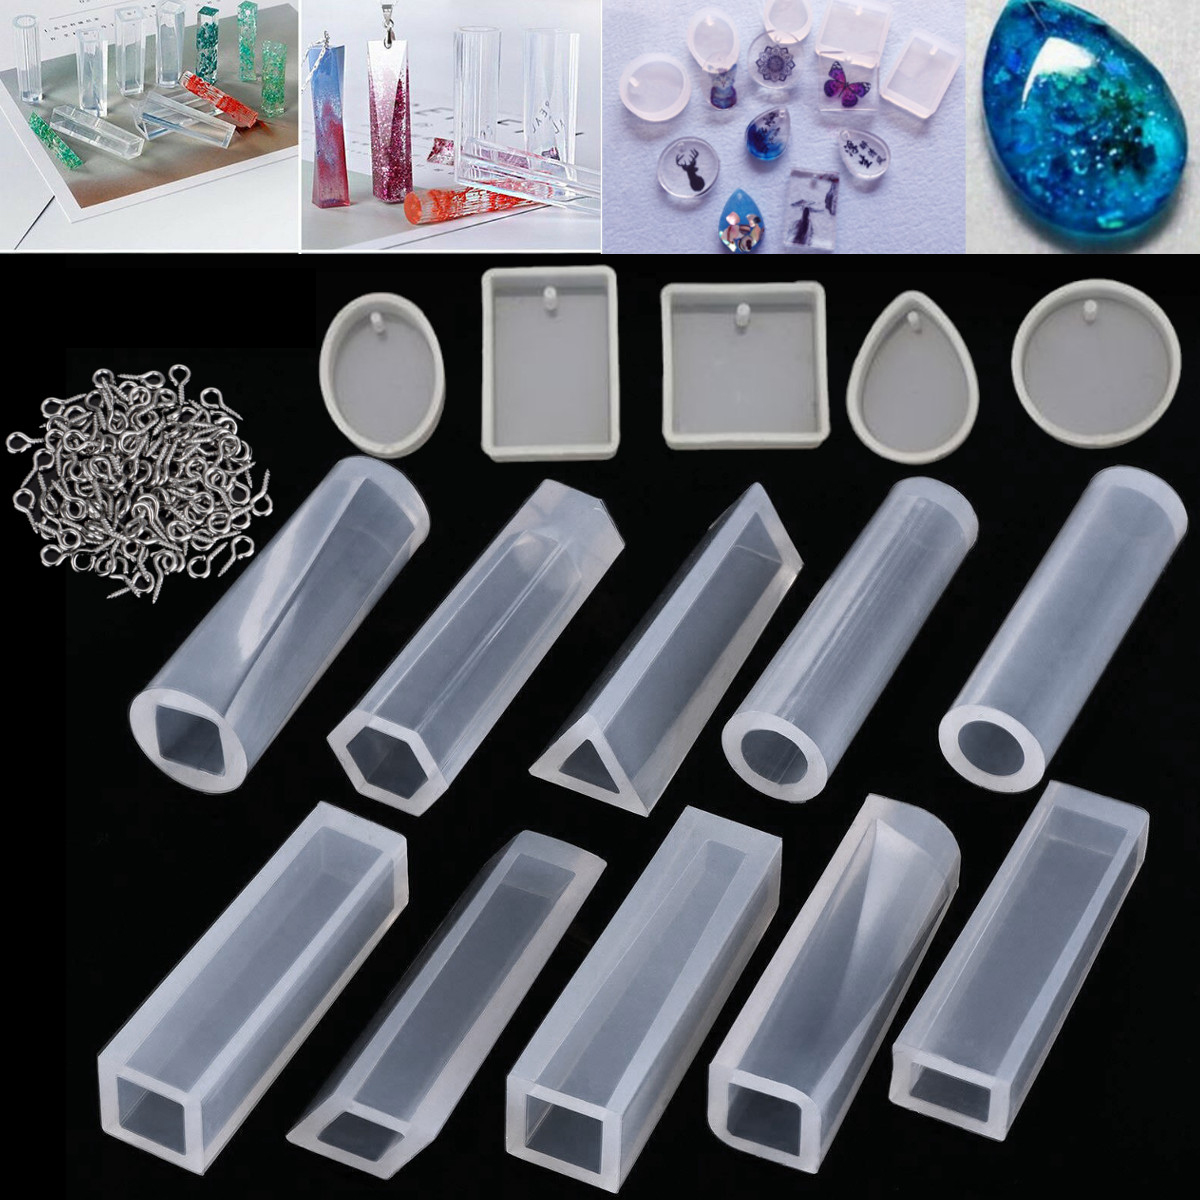 

115Pcs/Set Silicone Casting Molds and Tools Jewelry Pendant Resin Mould With Bag DIY